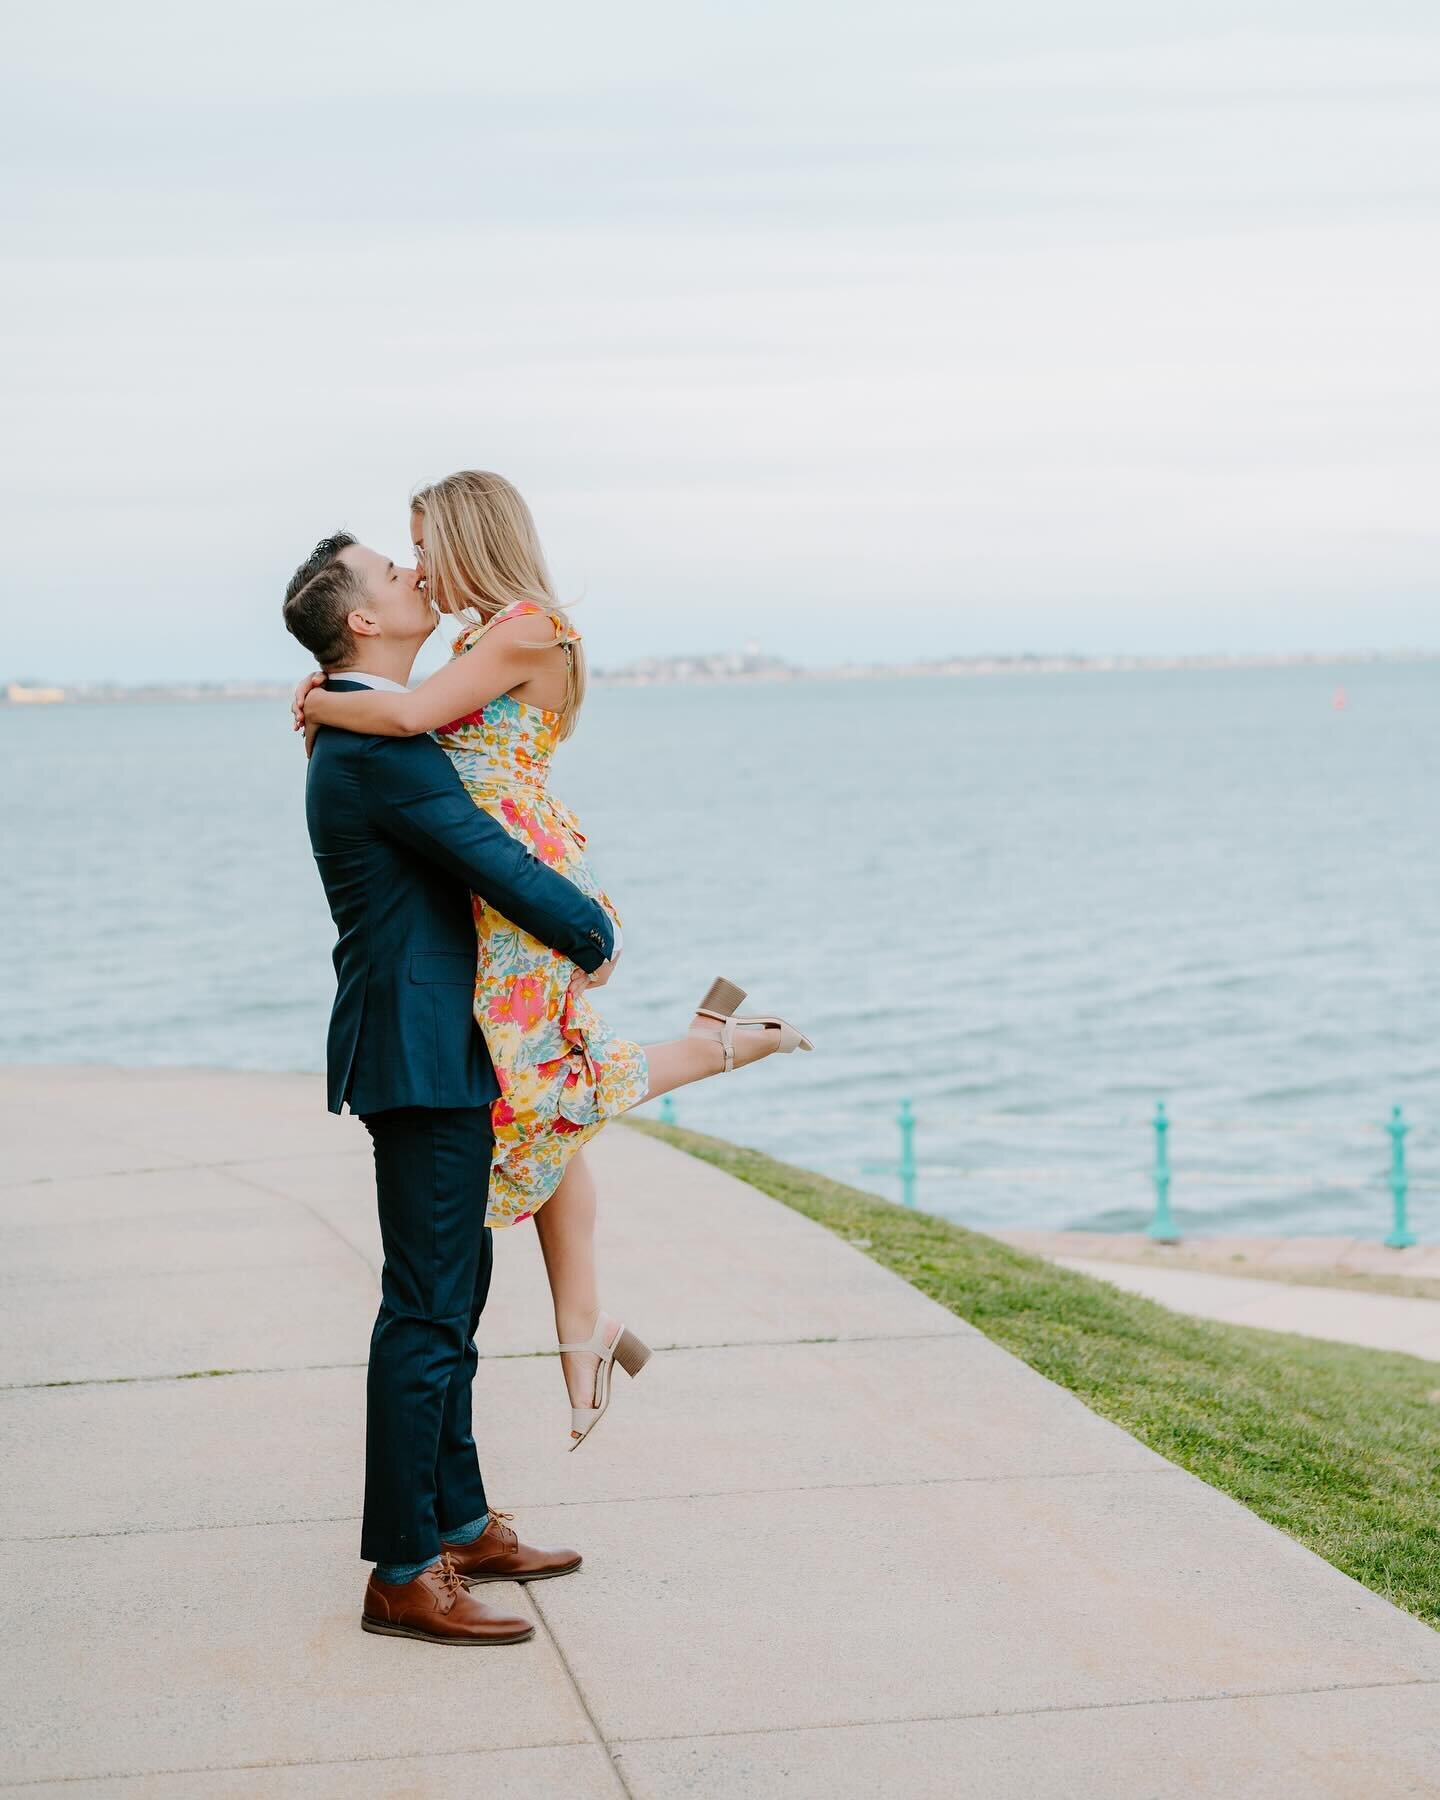 Started off my weekend with these two at Castle Island on Friday and it was SUCH a special way to kick off my wedding season with the first engagement sesh of 2024 🥰

So honored to be a part of your special day @_krysta_lyn_ and even more honored to